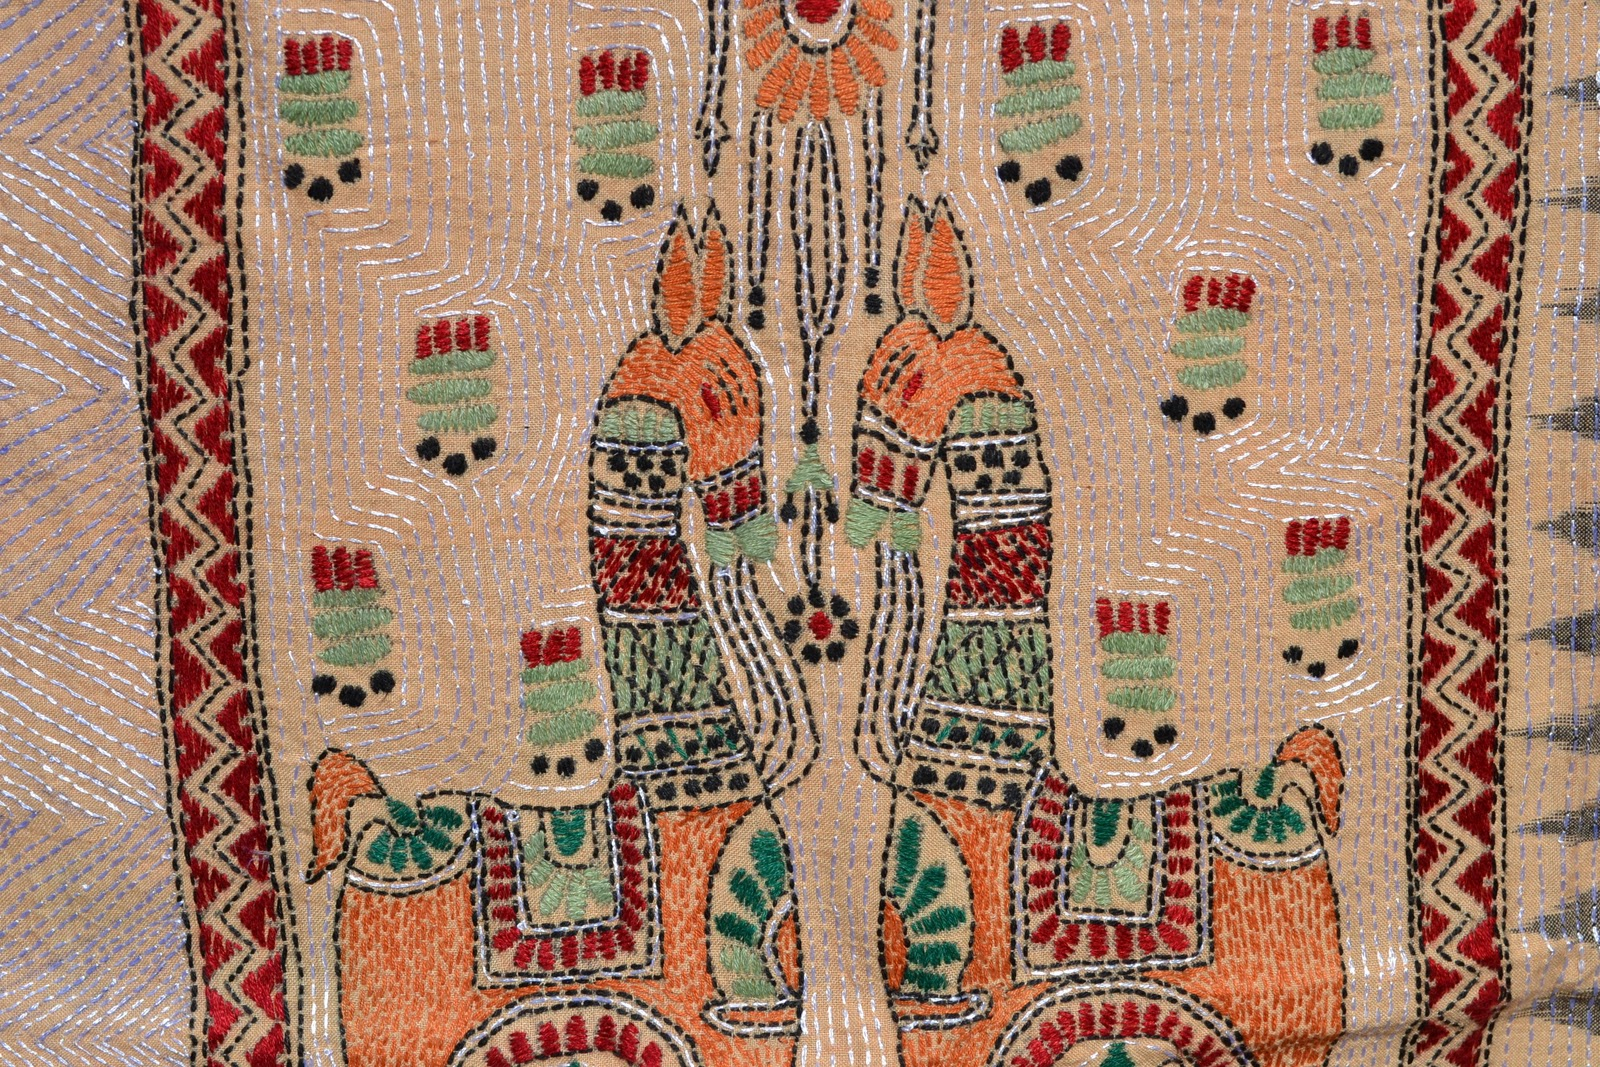 Kantha Work Embroidery Patterns Kantha Traditional Embroidery From India Nidhi Saxenas Blog